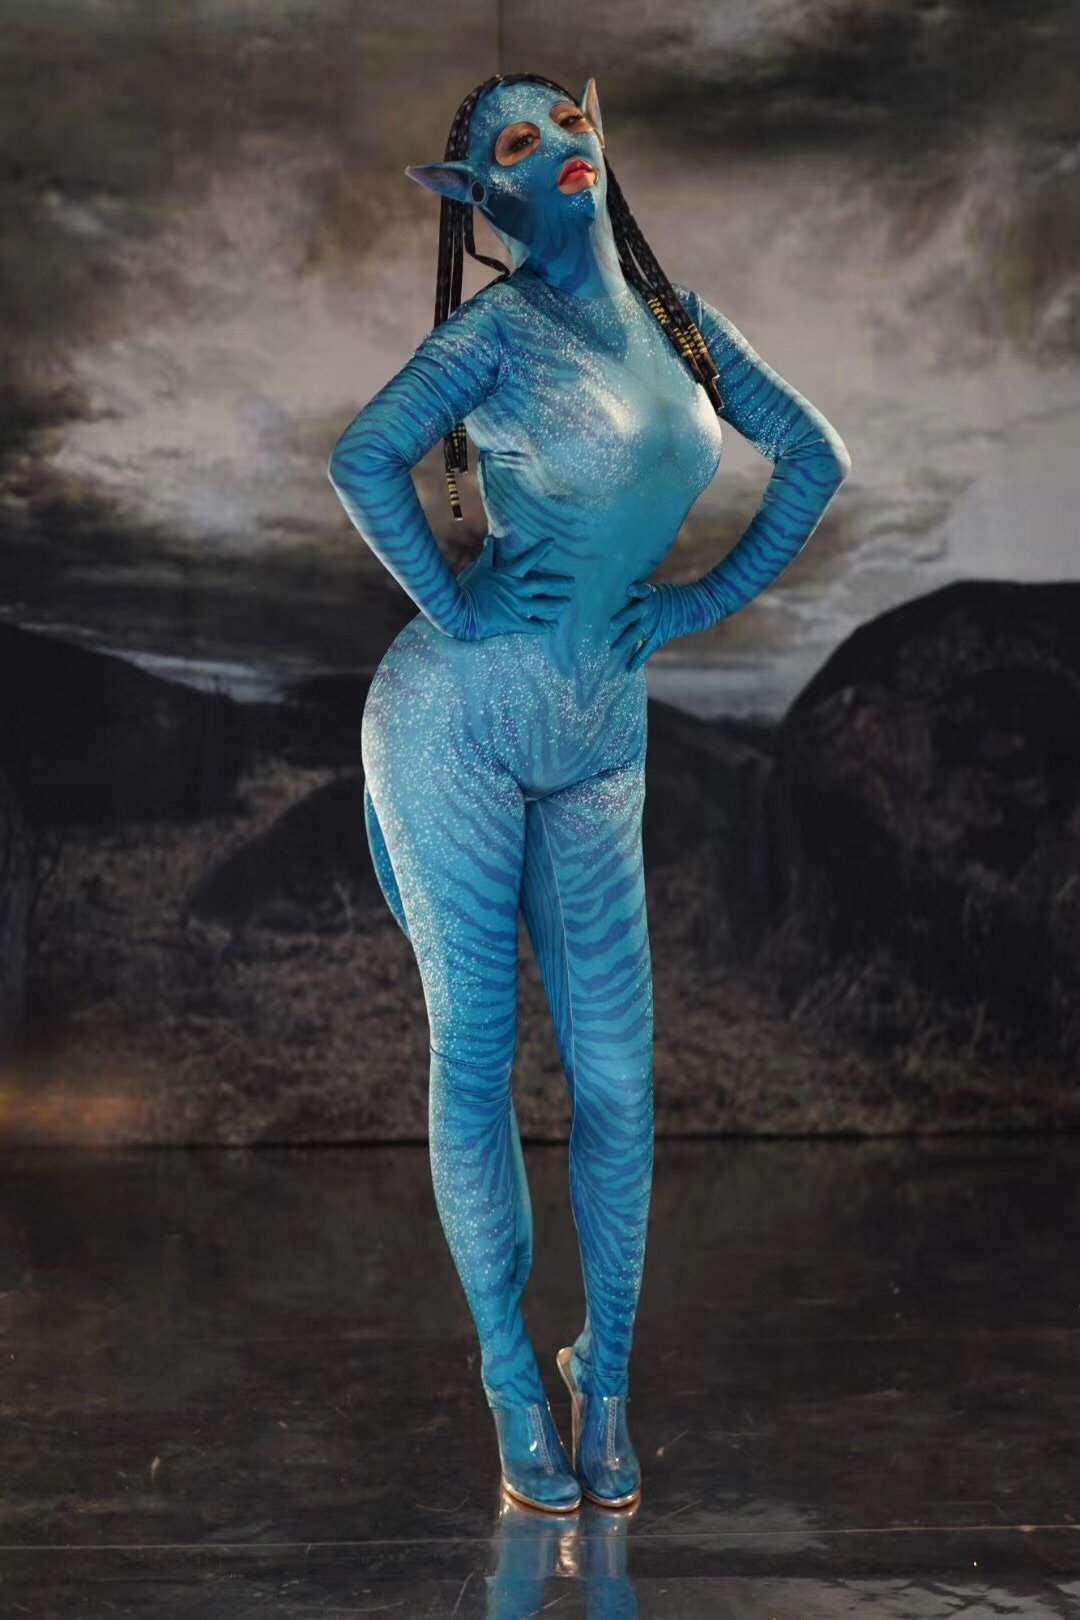 Avatar bodysuit party & events costume (women) Blue ship same day